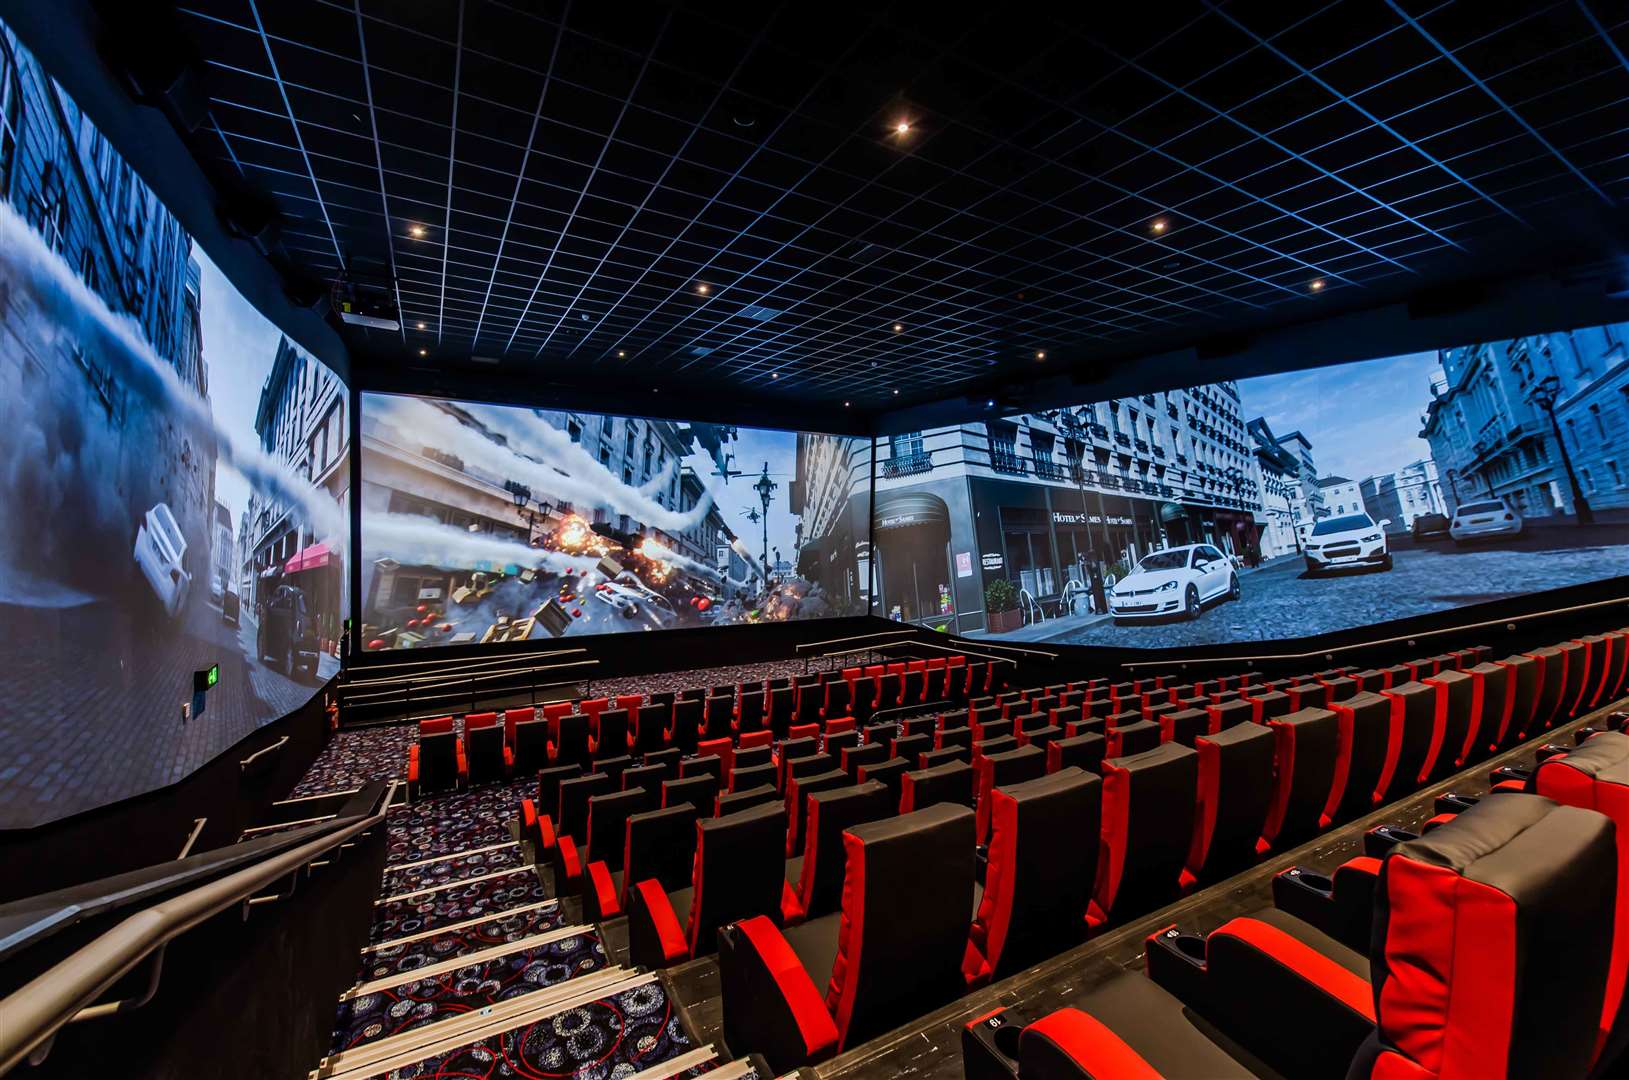 One of the original screens has been turned into a ScreenX auditorium